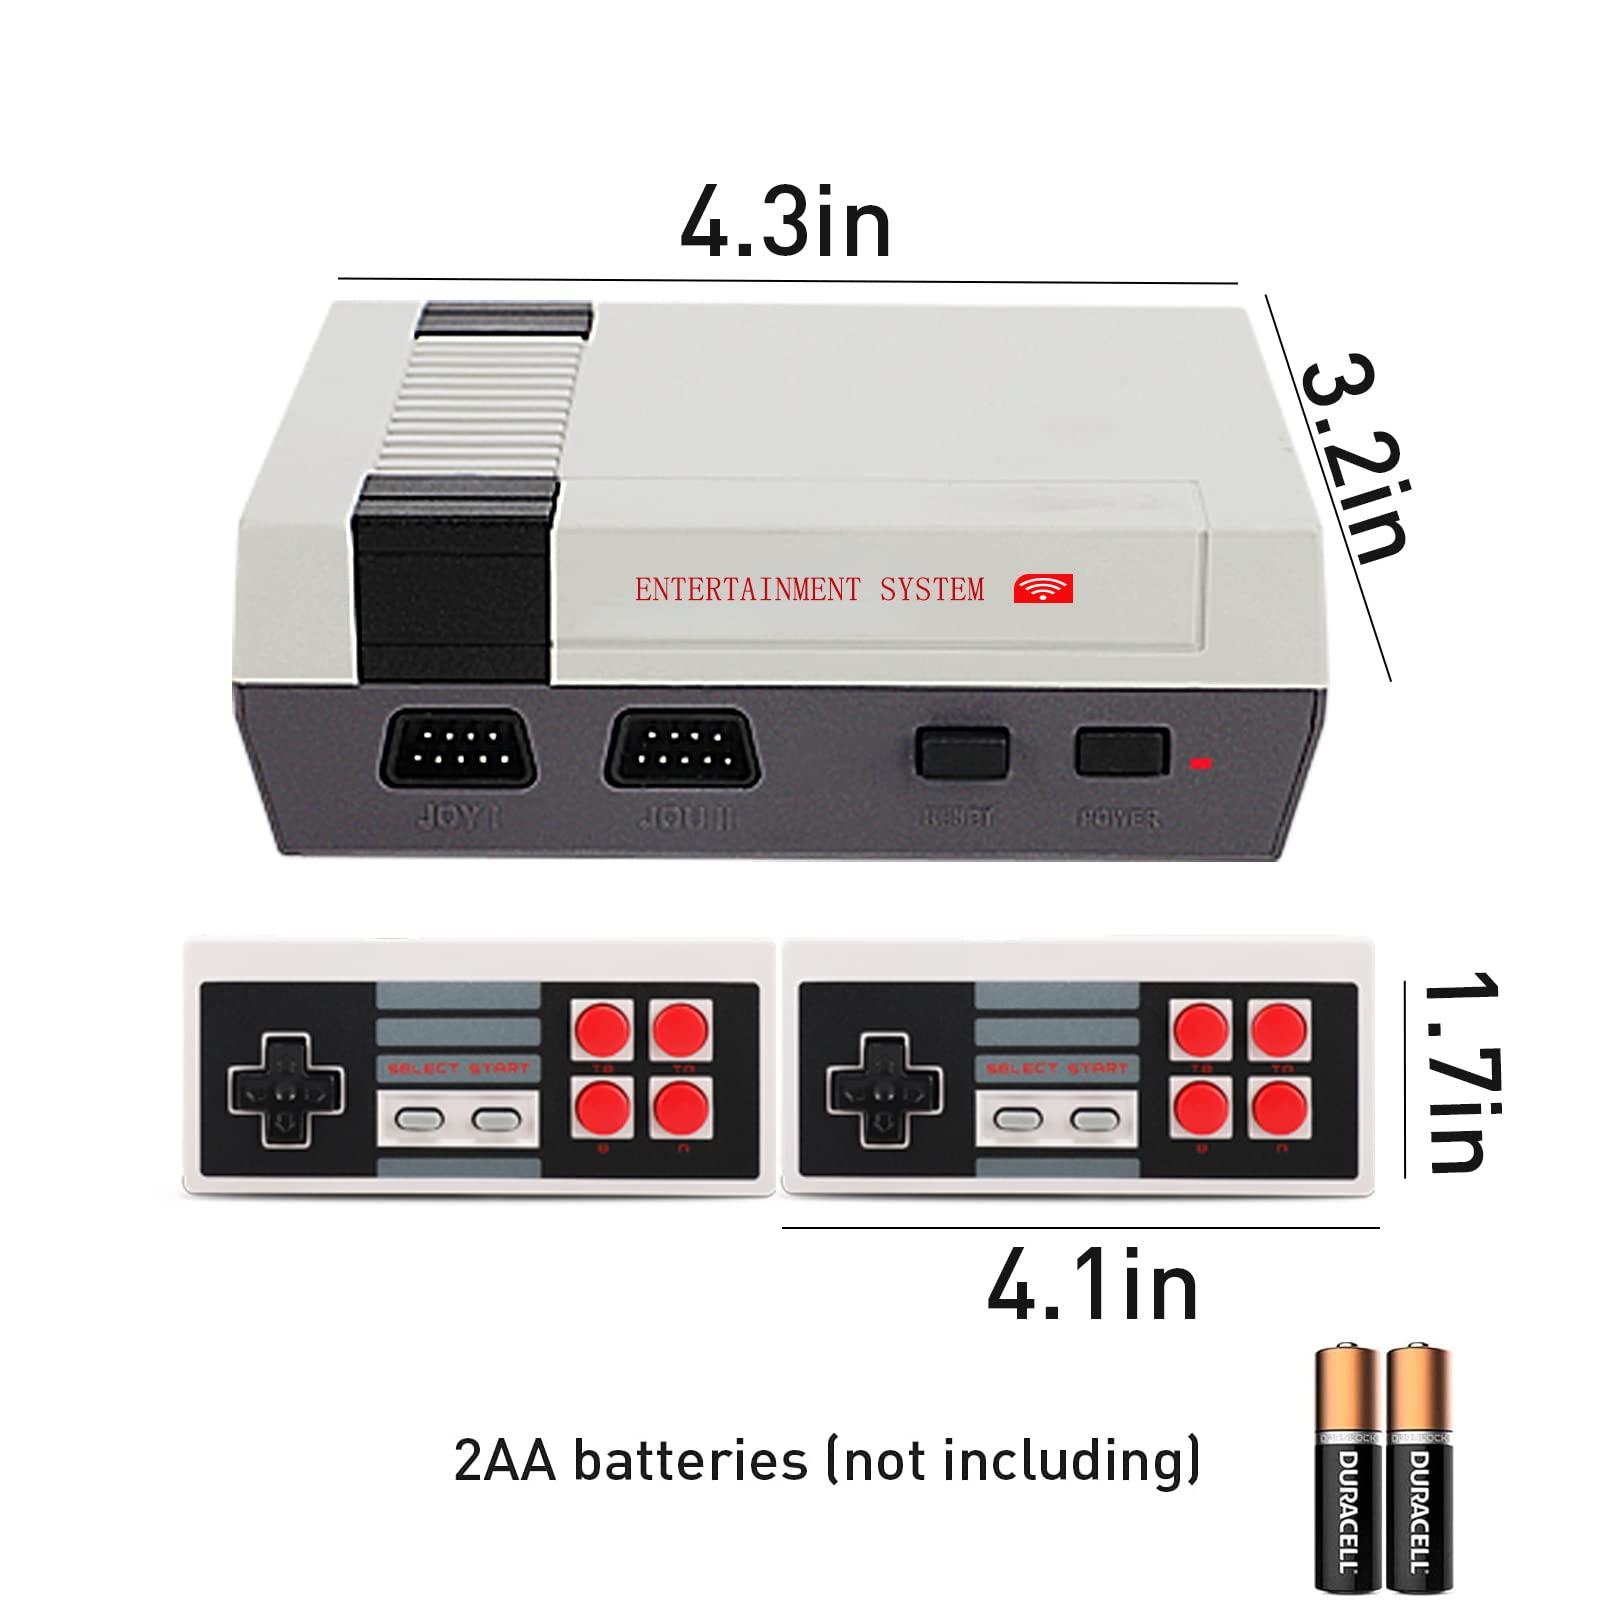 Jueapu Retro Game Console NES Classic Edition System Plug and Play TV Games with Wireless Controller, NES Game Console Built in 620 Classic Video Games Emulator for Kids and Adults AV Output